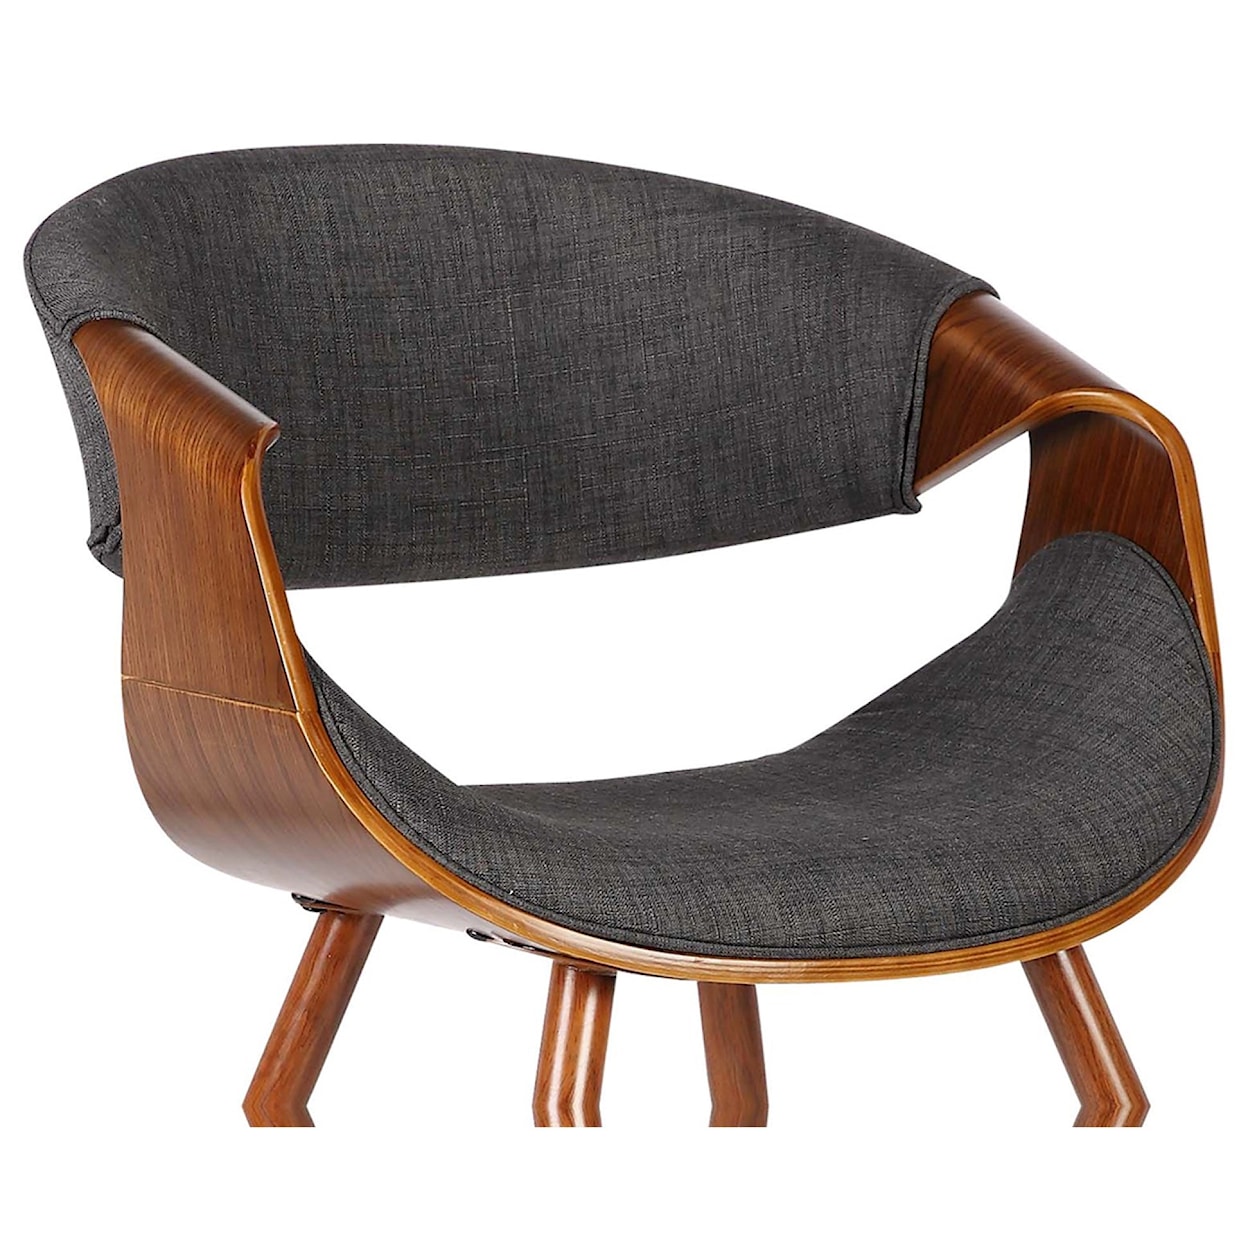 Armen Living Butterfly Mid-Century Dining Chair in Charcoal Fabric